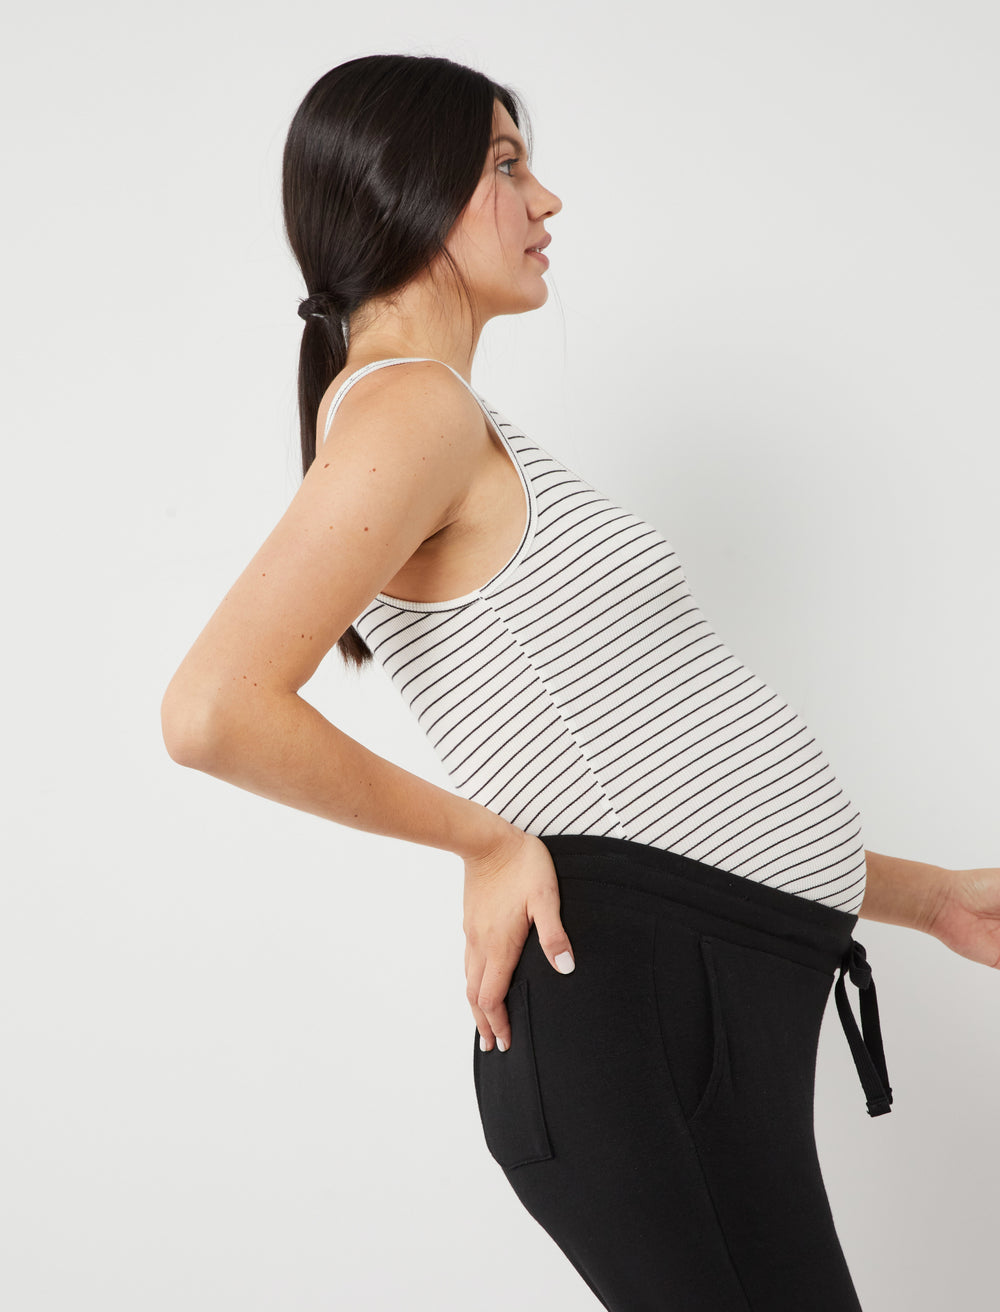 Luxe Rib Knit Maternity Tank Top - A Pea In the Pod